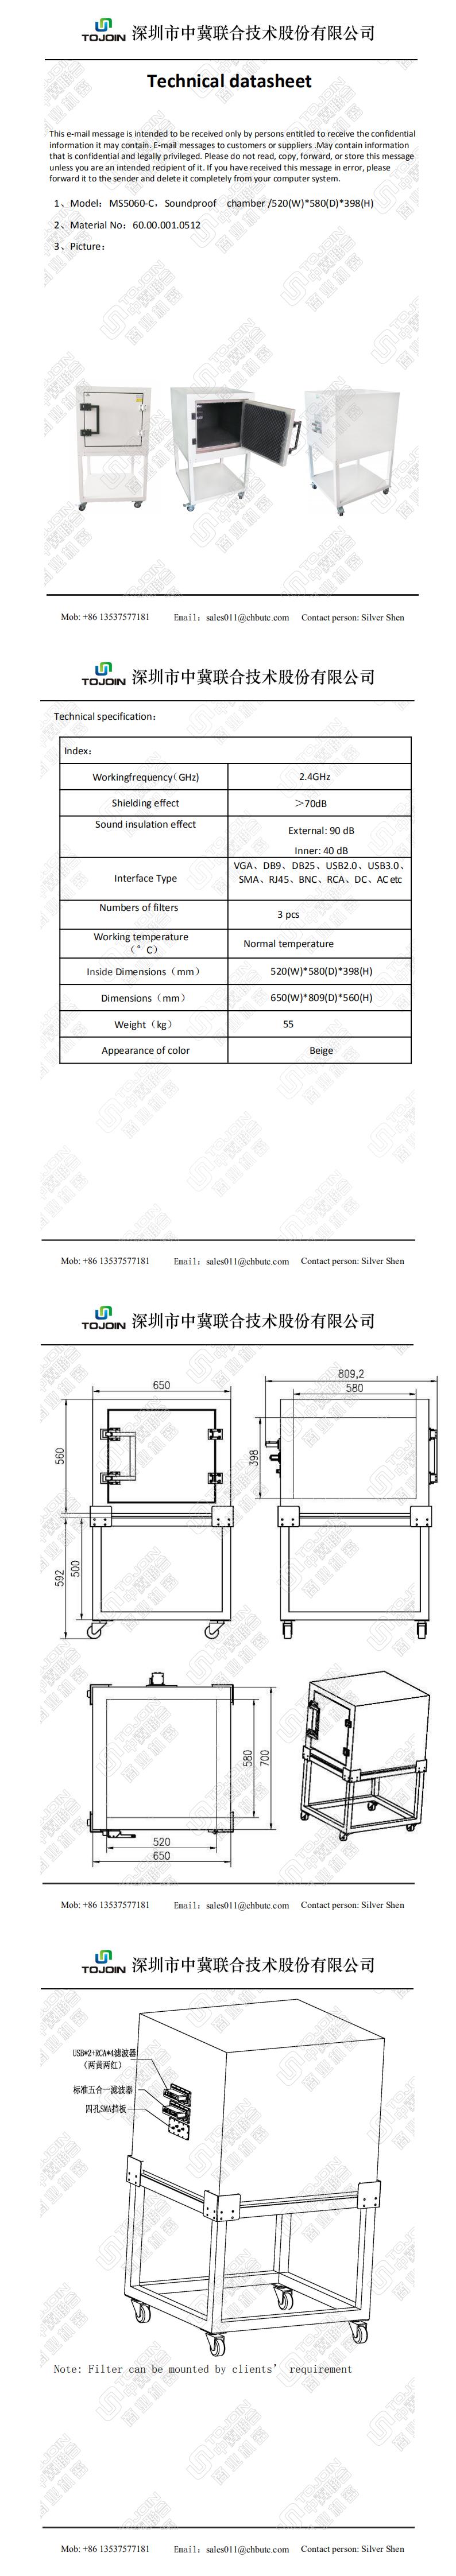 60.00.001.0512  MS5060-C Technical specification_0.jpg